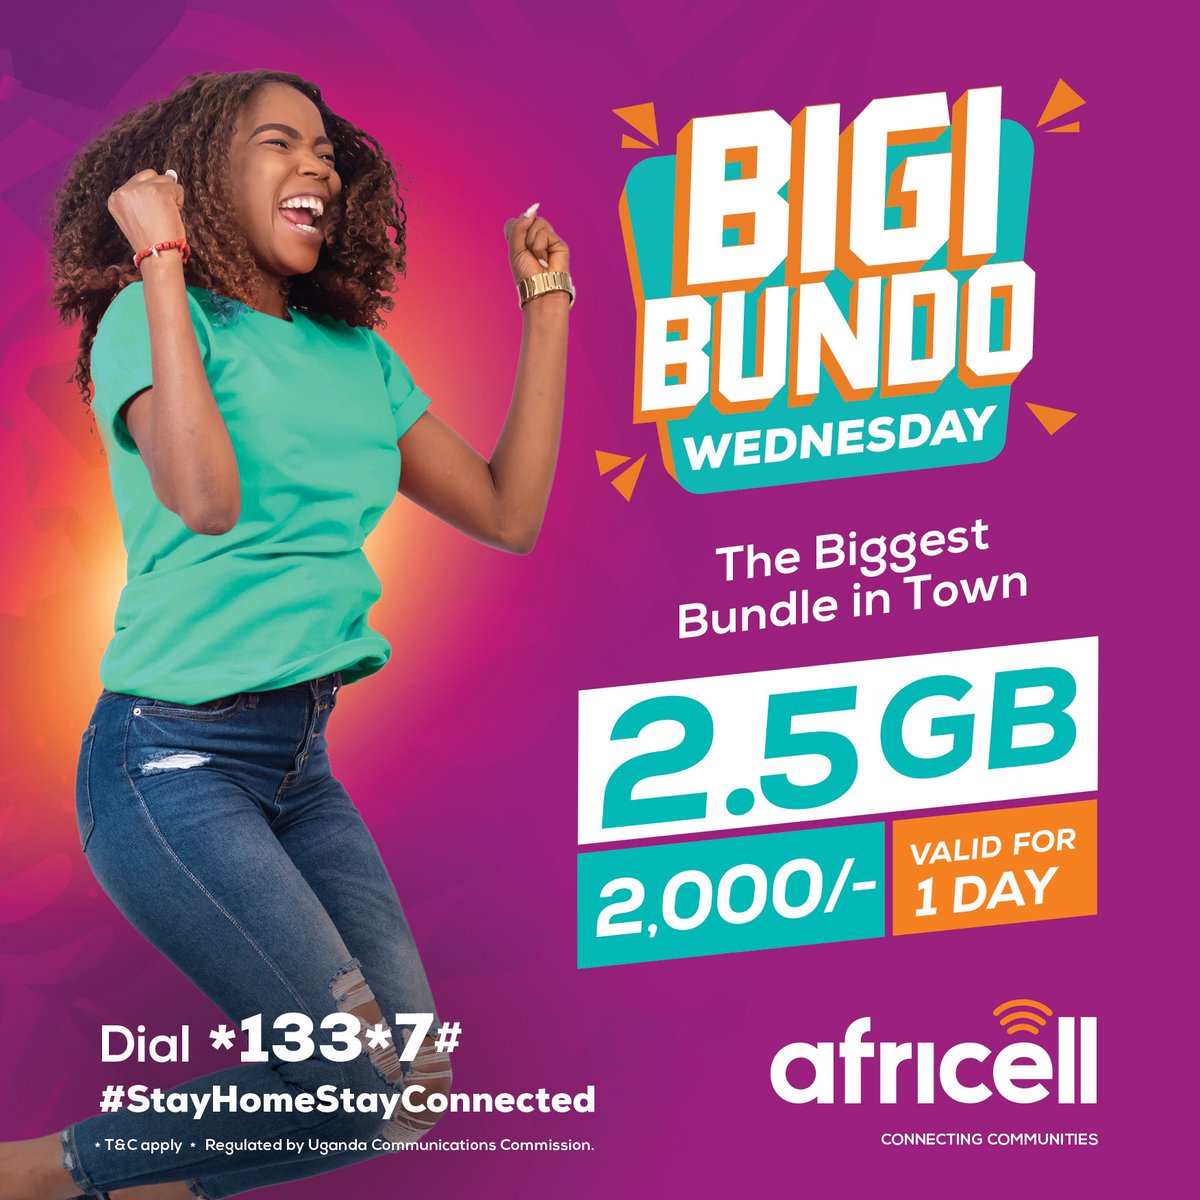 The Wednesday #BigiBundo is here! At just UGX 2,000 get 2.5GB valid for a day. Dial *133*7# to activate the BIGGEST BUNDO IN TOWN. #ConnectingCommunities